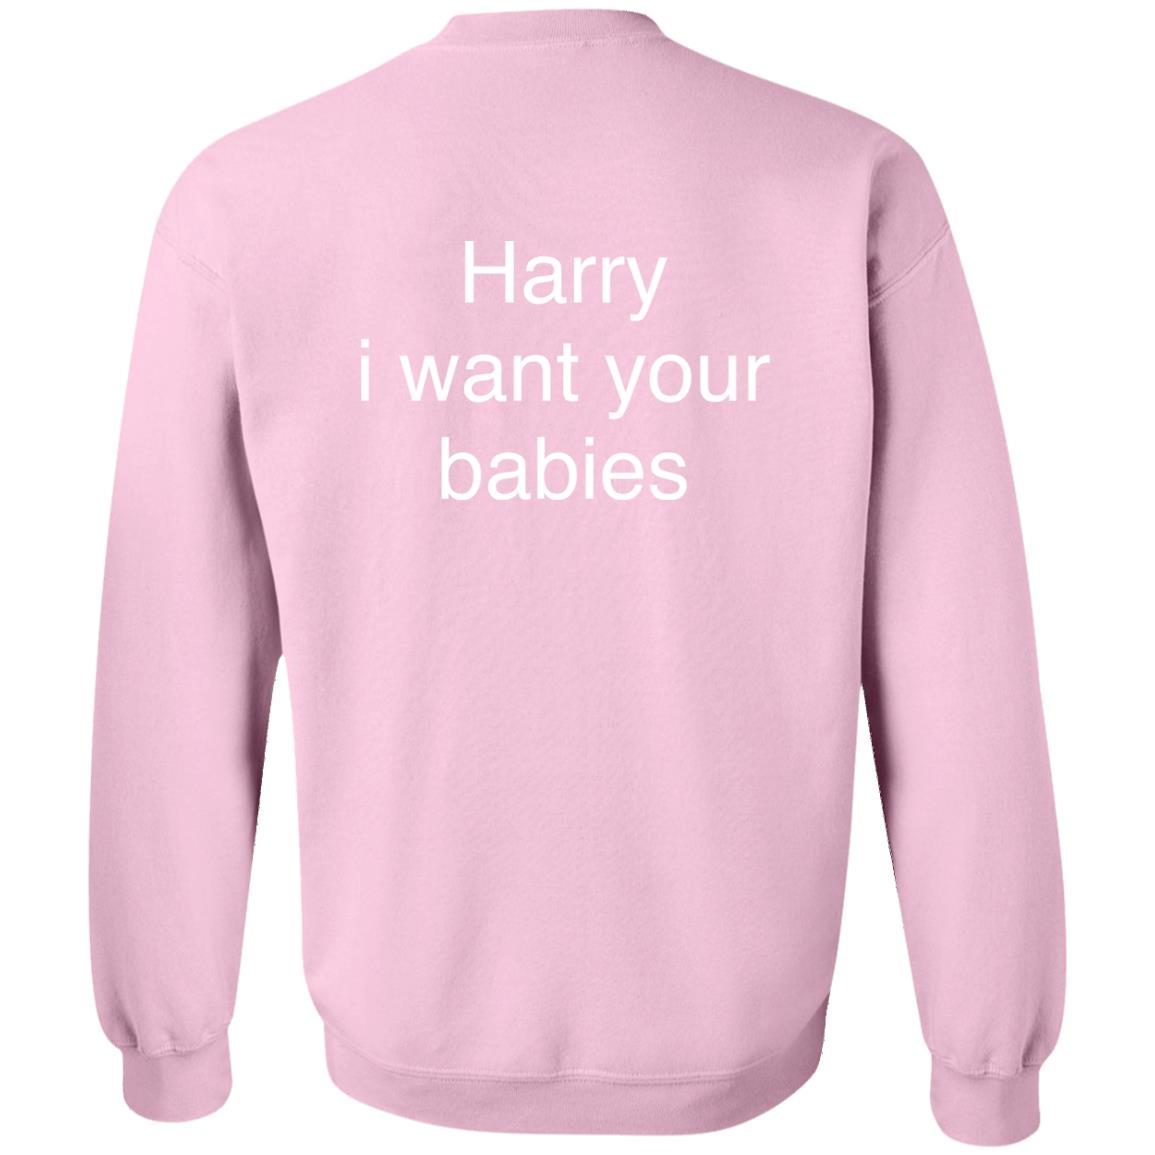 Harry I Want Your Babies shirt 2